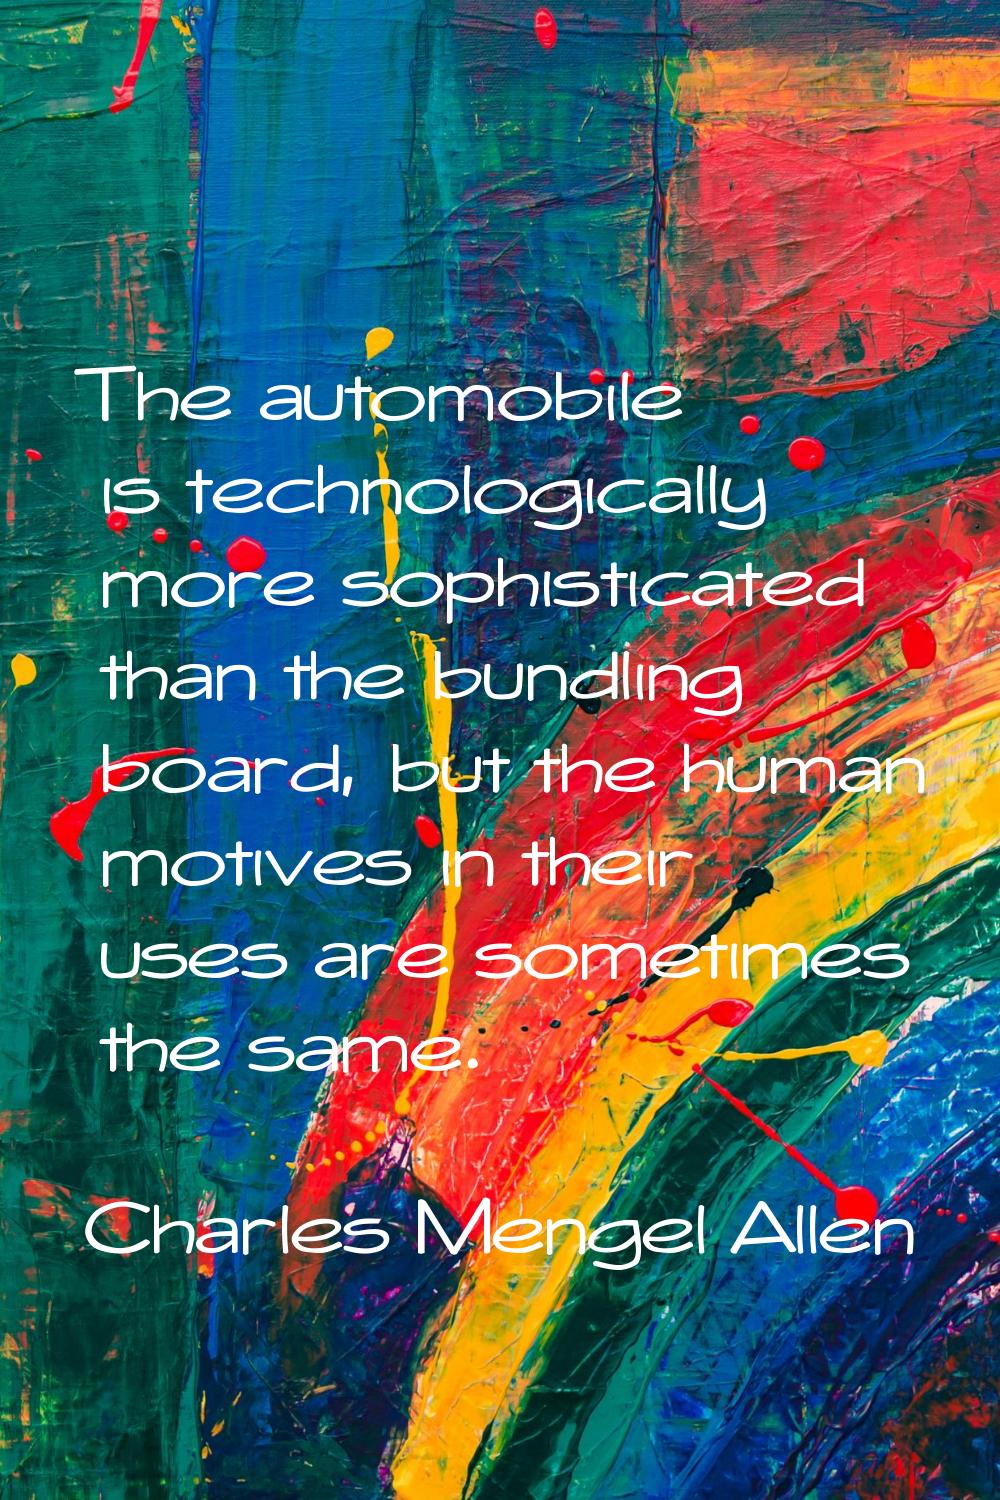 The automobile is technologically more sophisticated than the bundling board, but the human motives